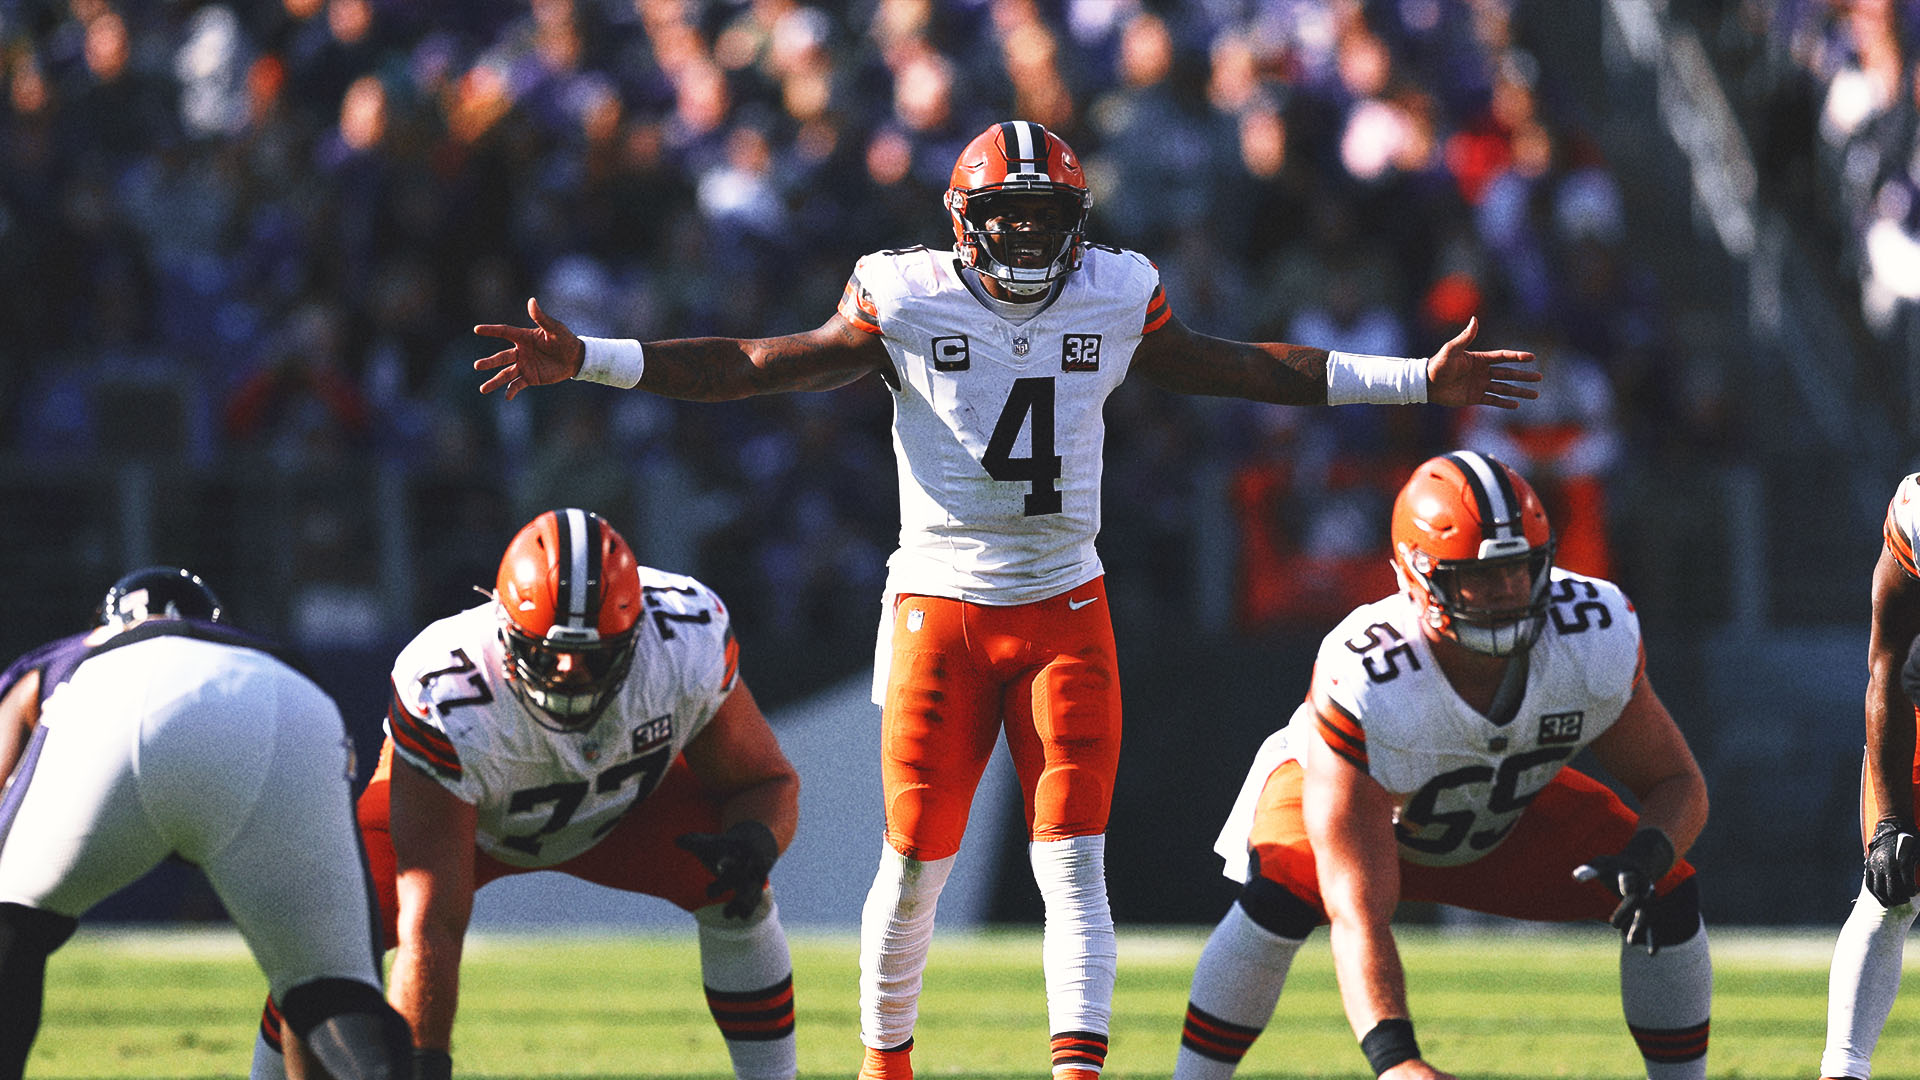 Deshaun Watson rallies Browns in dramatic comeback win over Ravens, tightening AFC North